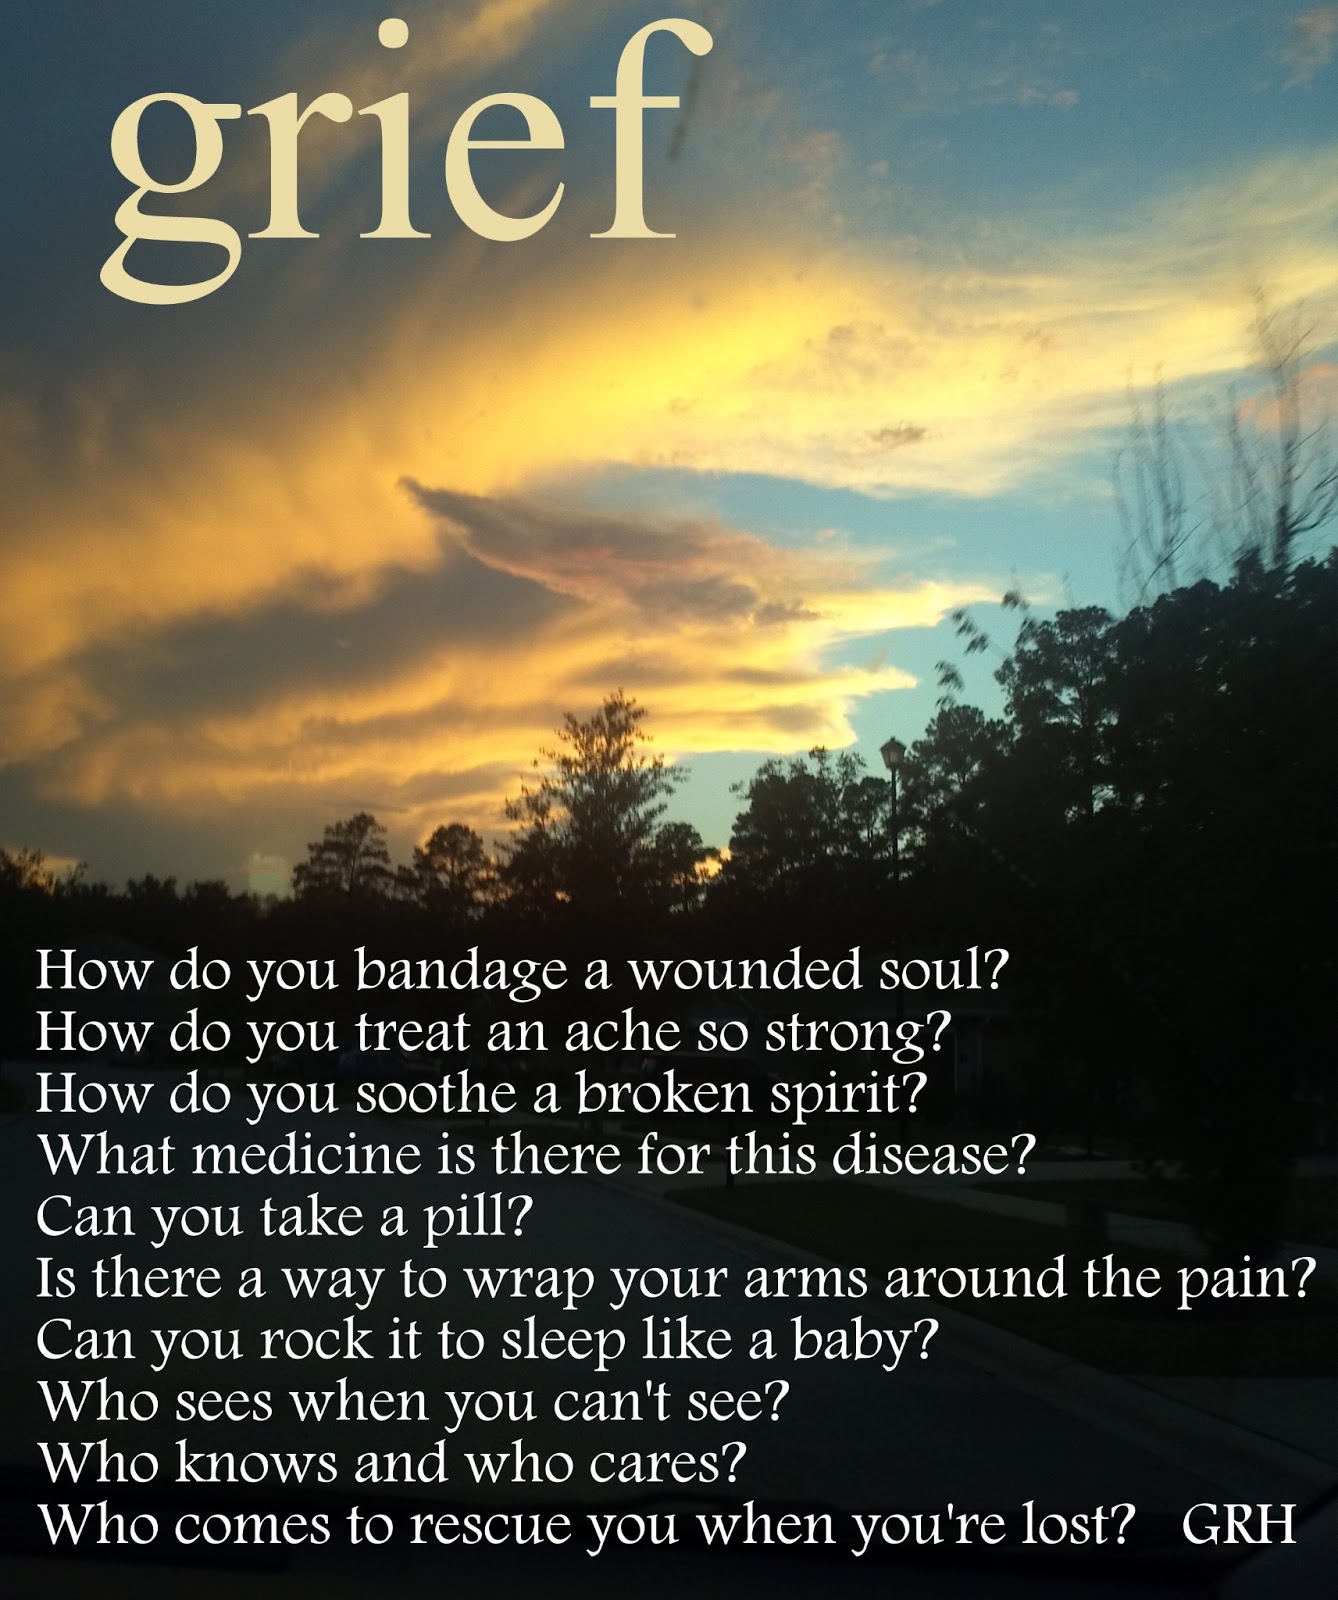 Quotes For Someone Grieving Quotes for people in mourning quotesgram